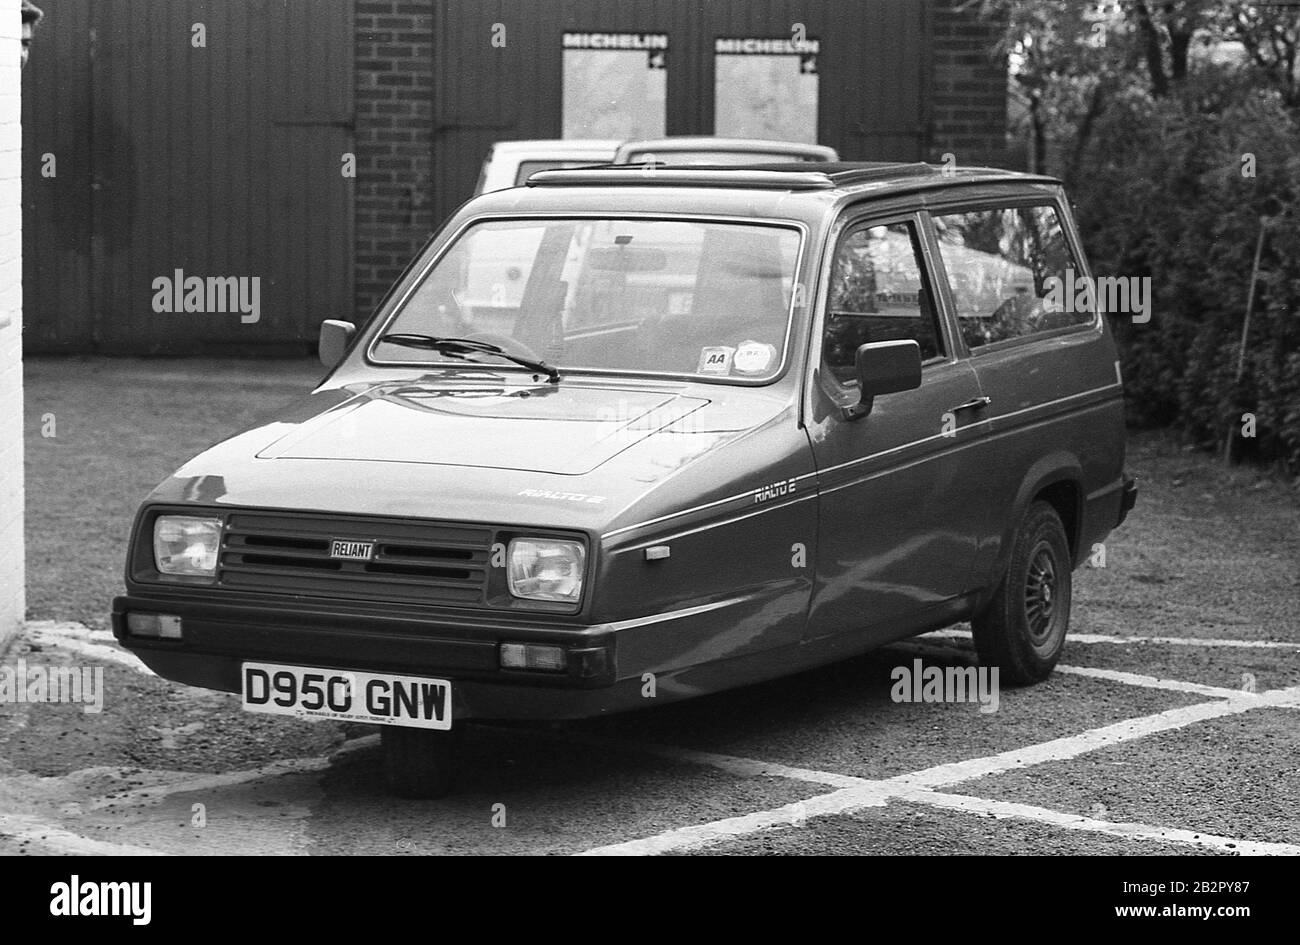 1980s, historical, a Reliant Rialto 2 estate car parked outside some garage doors. The three-wheeled car, built out of fibreglass, replaced the Reliant Robin and was the second version of the Rialto model being produced from 1983 to 1986. Stock Photo